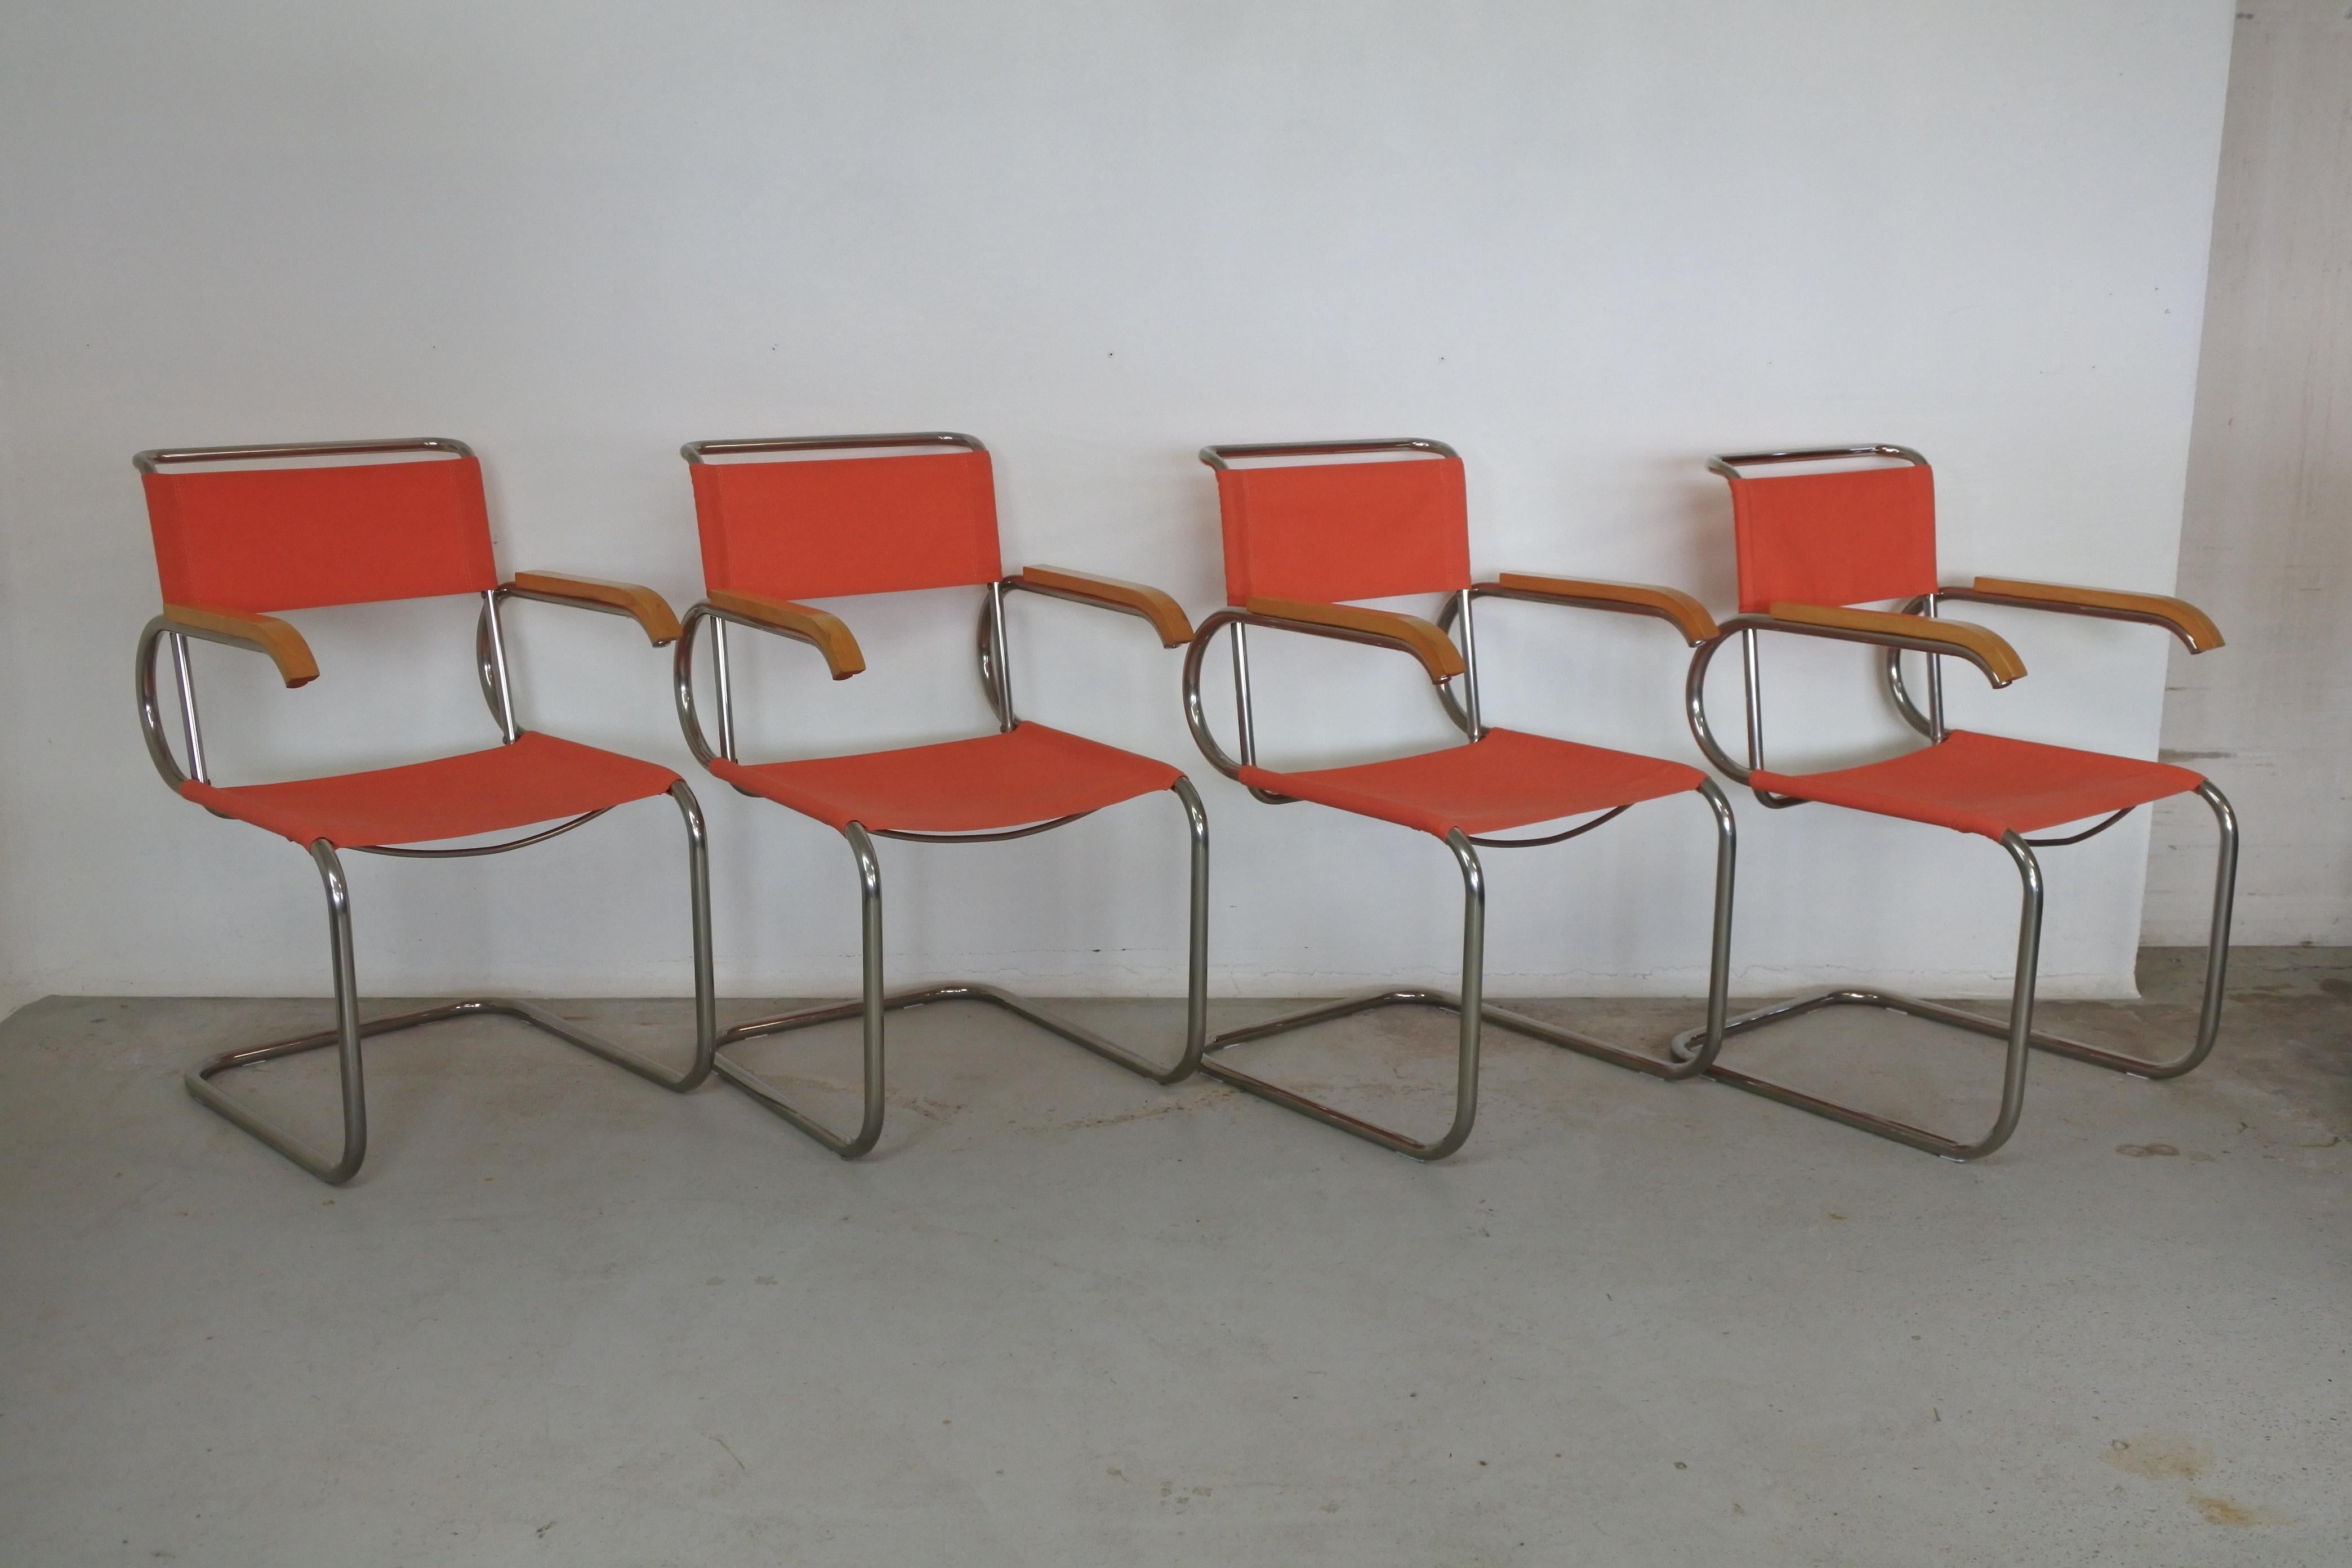 Set of 4 Bauhaus cantilever armchairs by Marcel Breuer
Model D40, designed in 1928 and manufactured by Tecta
Chromed steel, wood and fabric

Ideal as dining room chairs

Original purchase invoice

Fabric color is faded especially on the